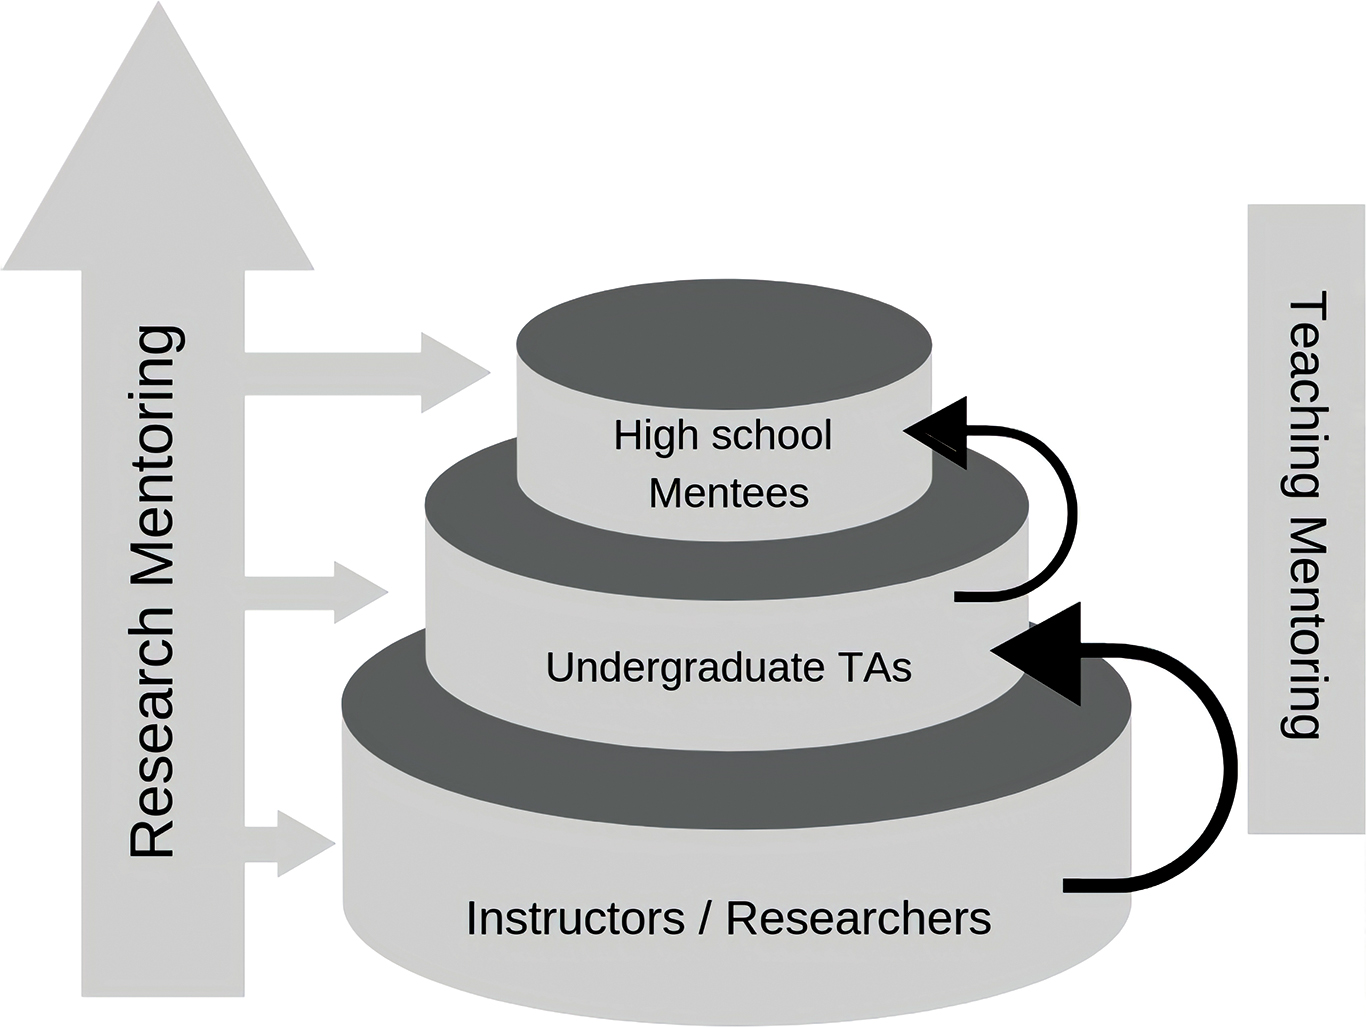 Tiered mentor model. This figure displays the research mentoring and teaching mentoring of the instructors, undergraduate teaching assistants (TAs), and high school students for the course.